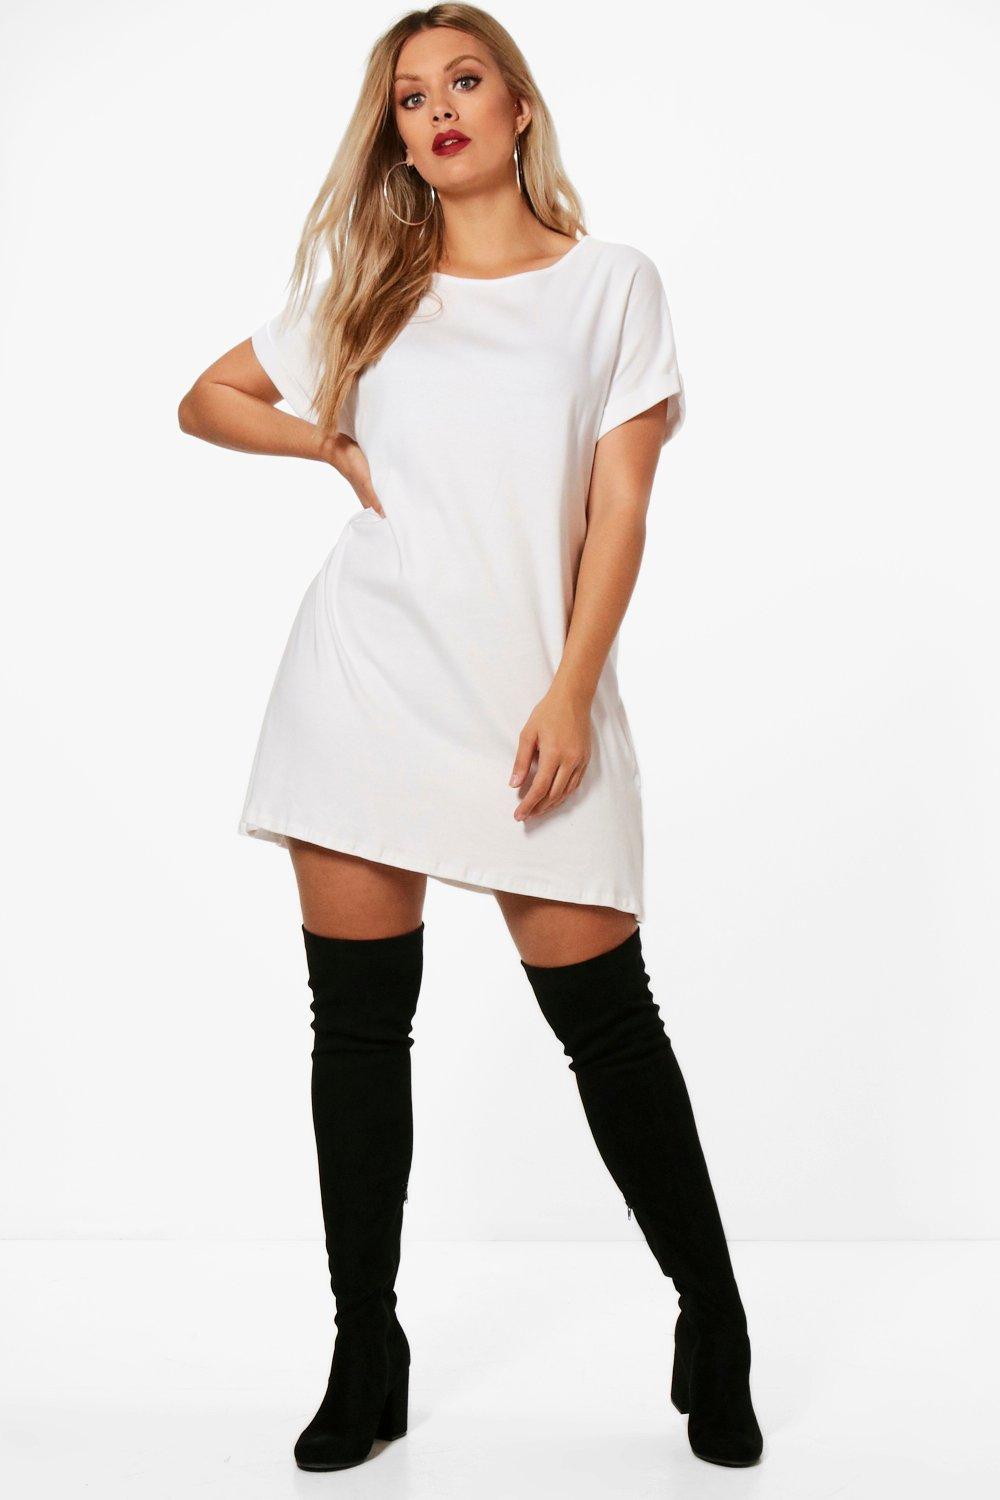 tshirt dress with boots